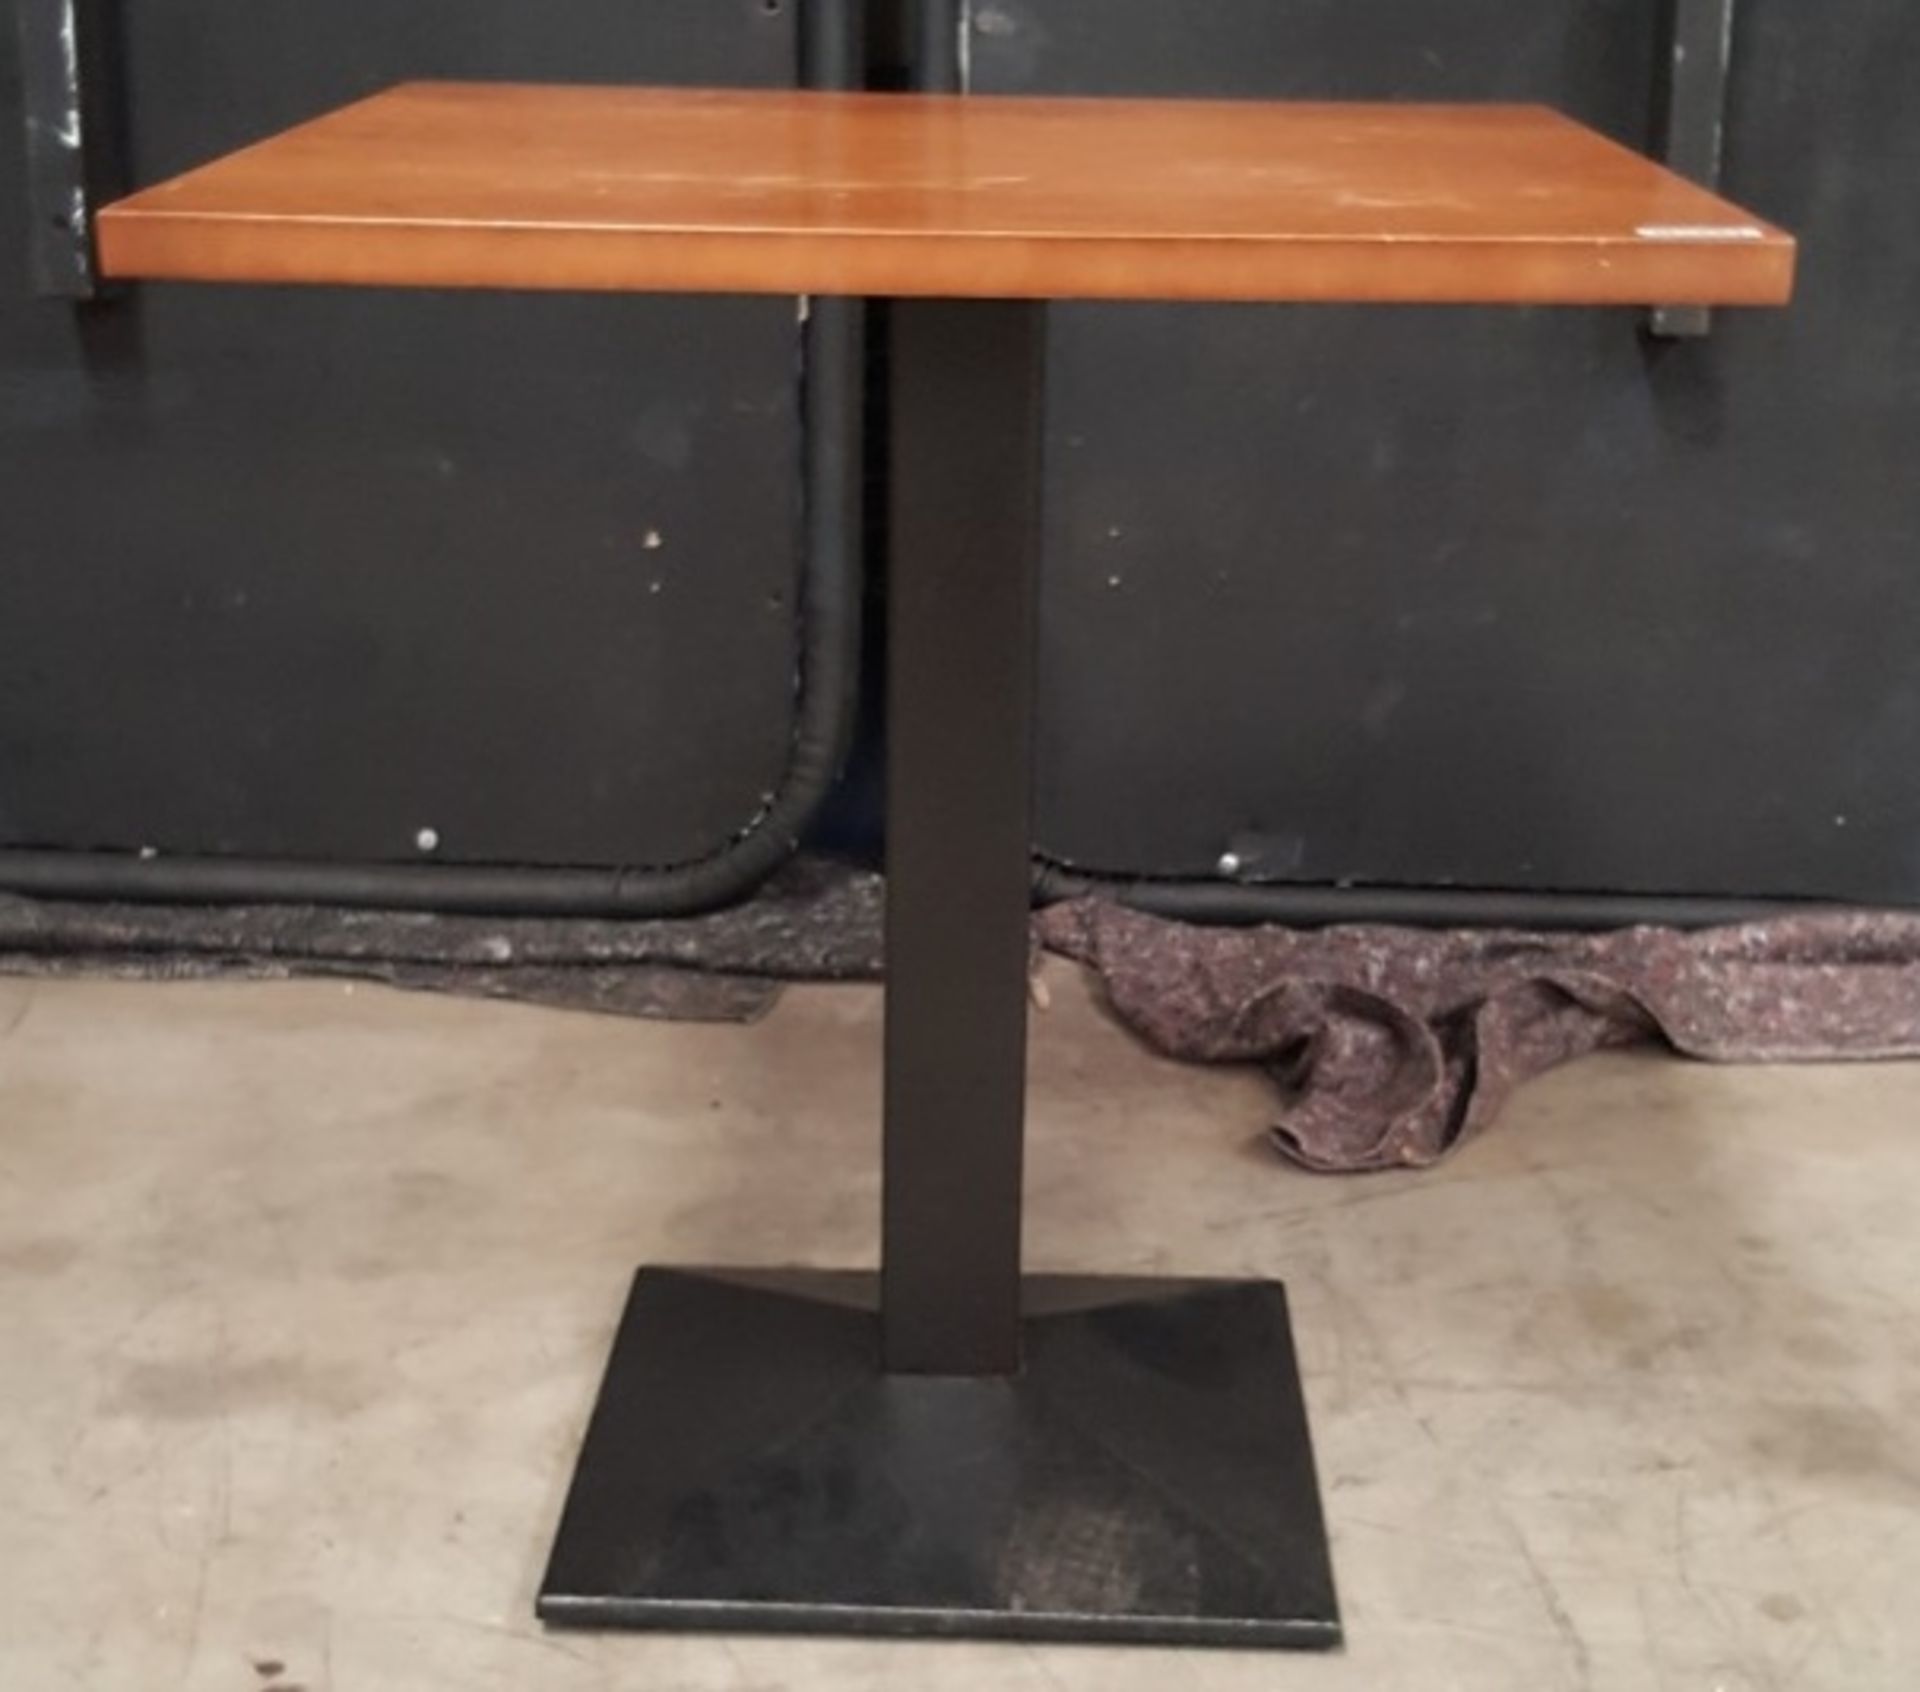 4 x Square Wood-Topped Bistro Tables With Metal Bases - MA551 - CL350 - Location: Altrincham WA14 - Image 2 of 4